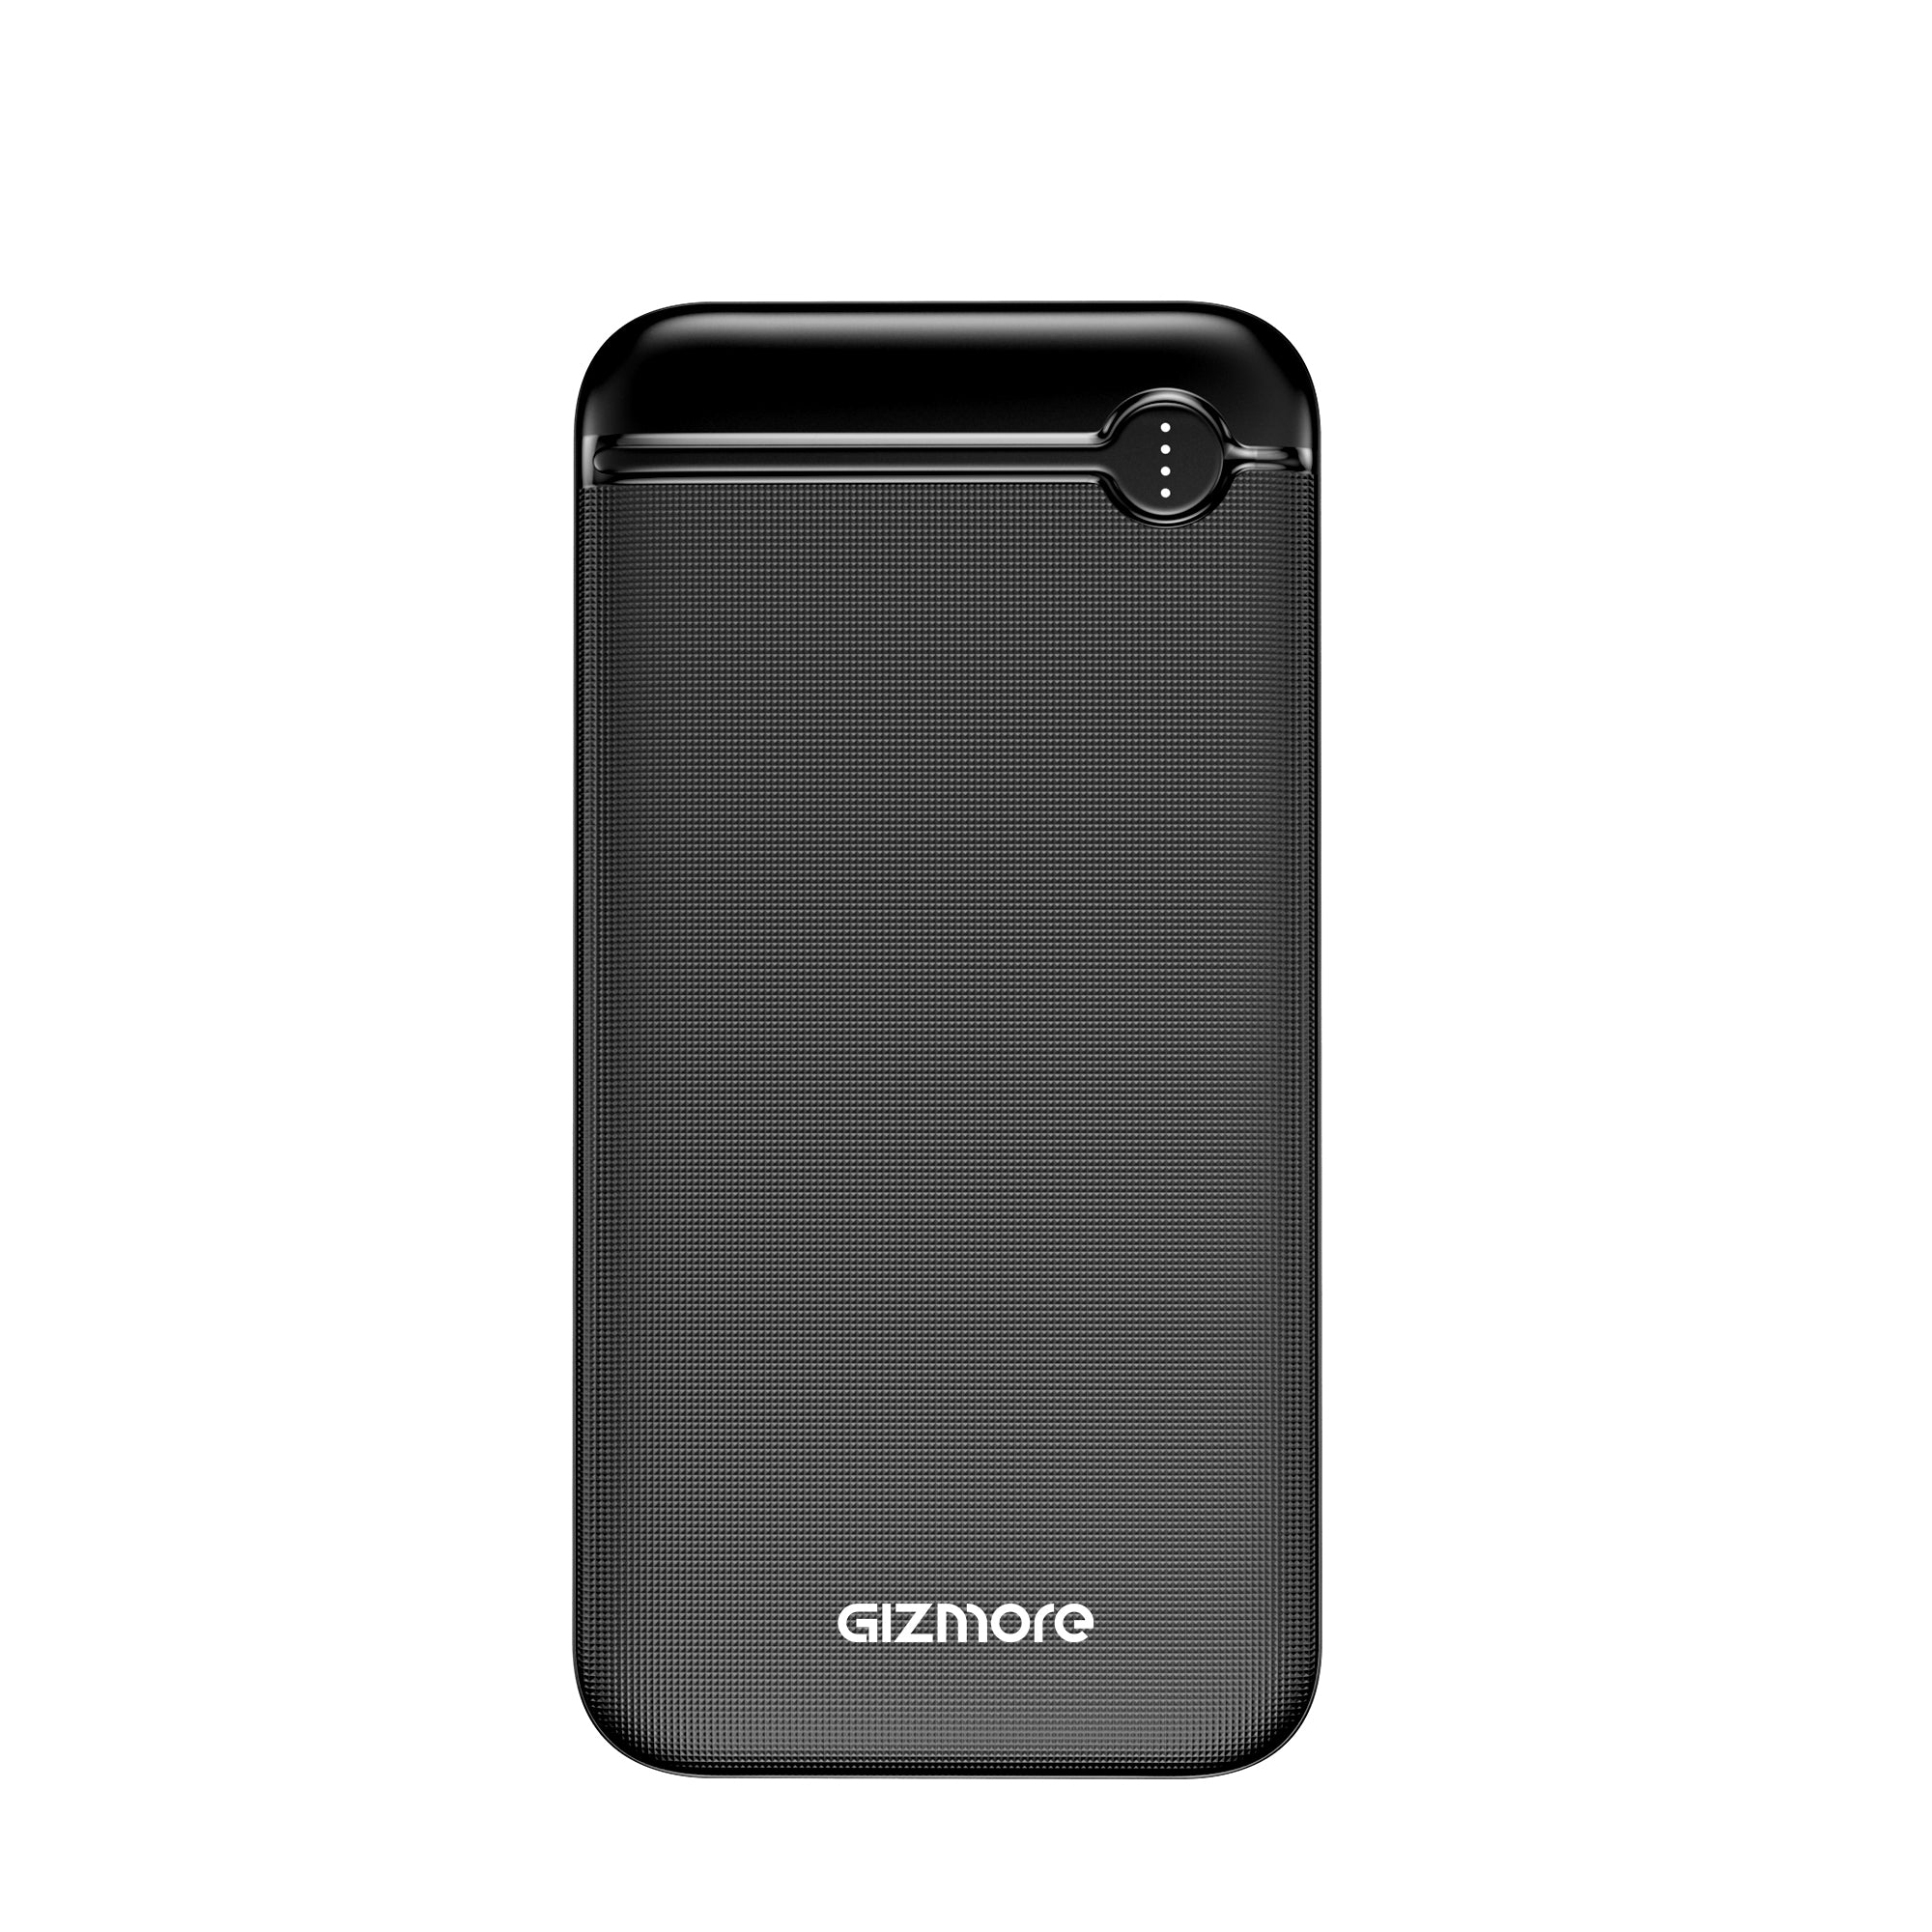 GIZMORE PB10KP15 10000mAh 12W Power Bank With Fast Charging | Dual Output Ports | Dual Input Ports | LED Indicator| Lithium Polymer Power Bank for Mobiles, Tablets and Digital Camera (Black)